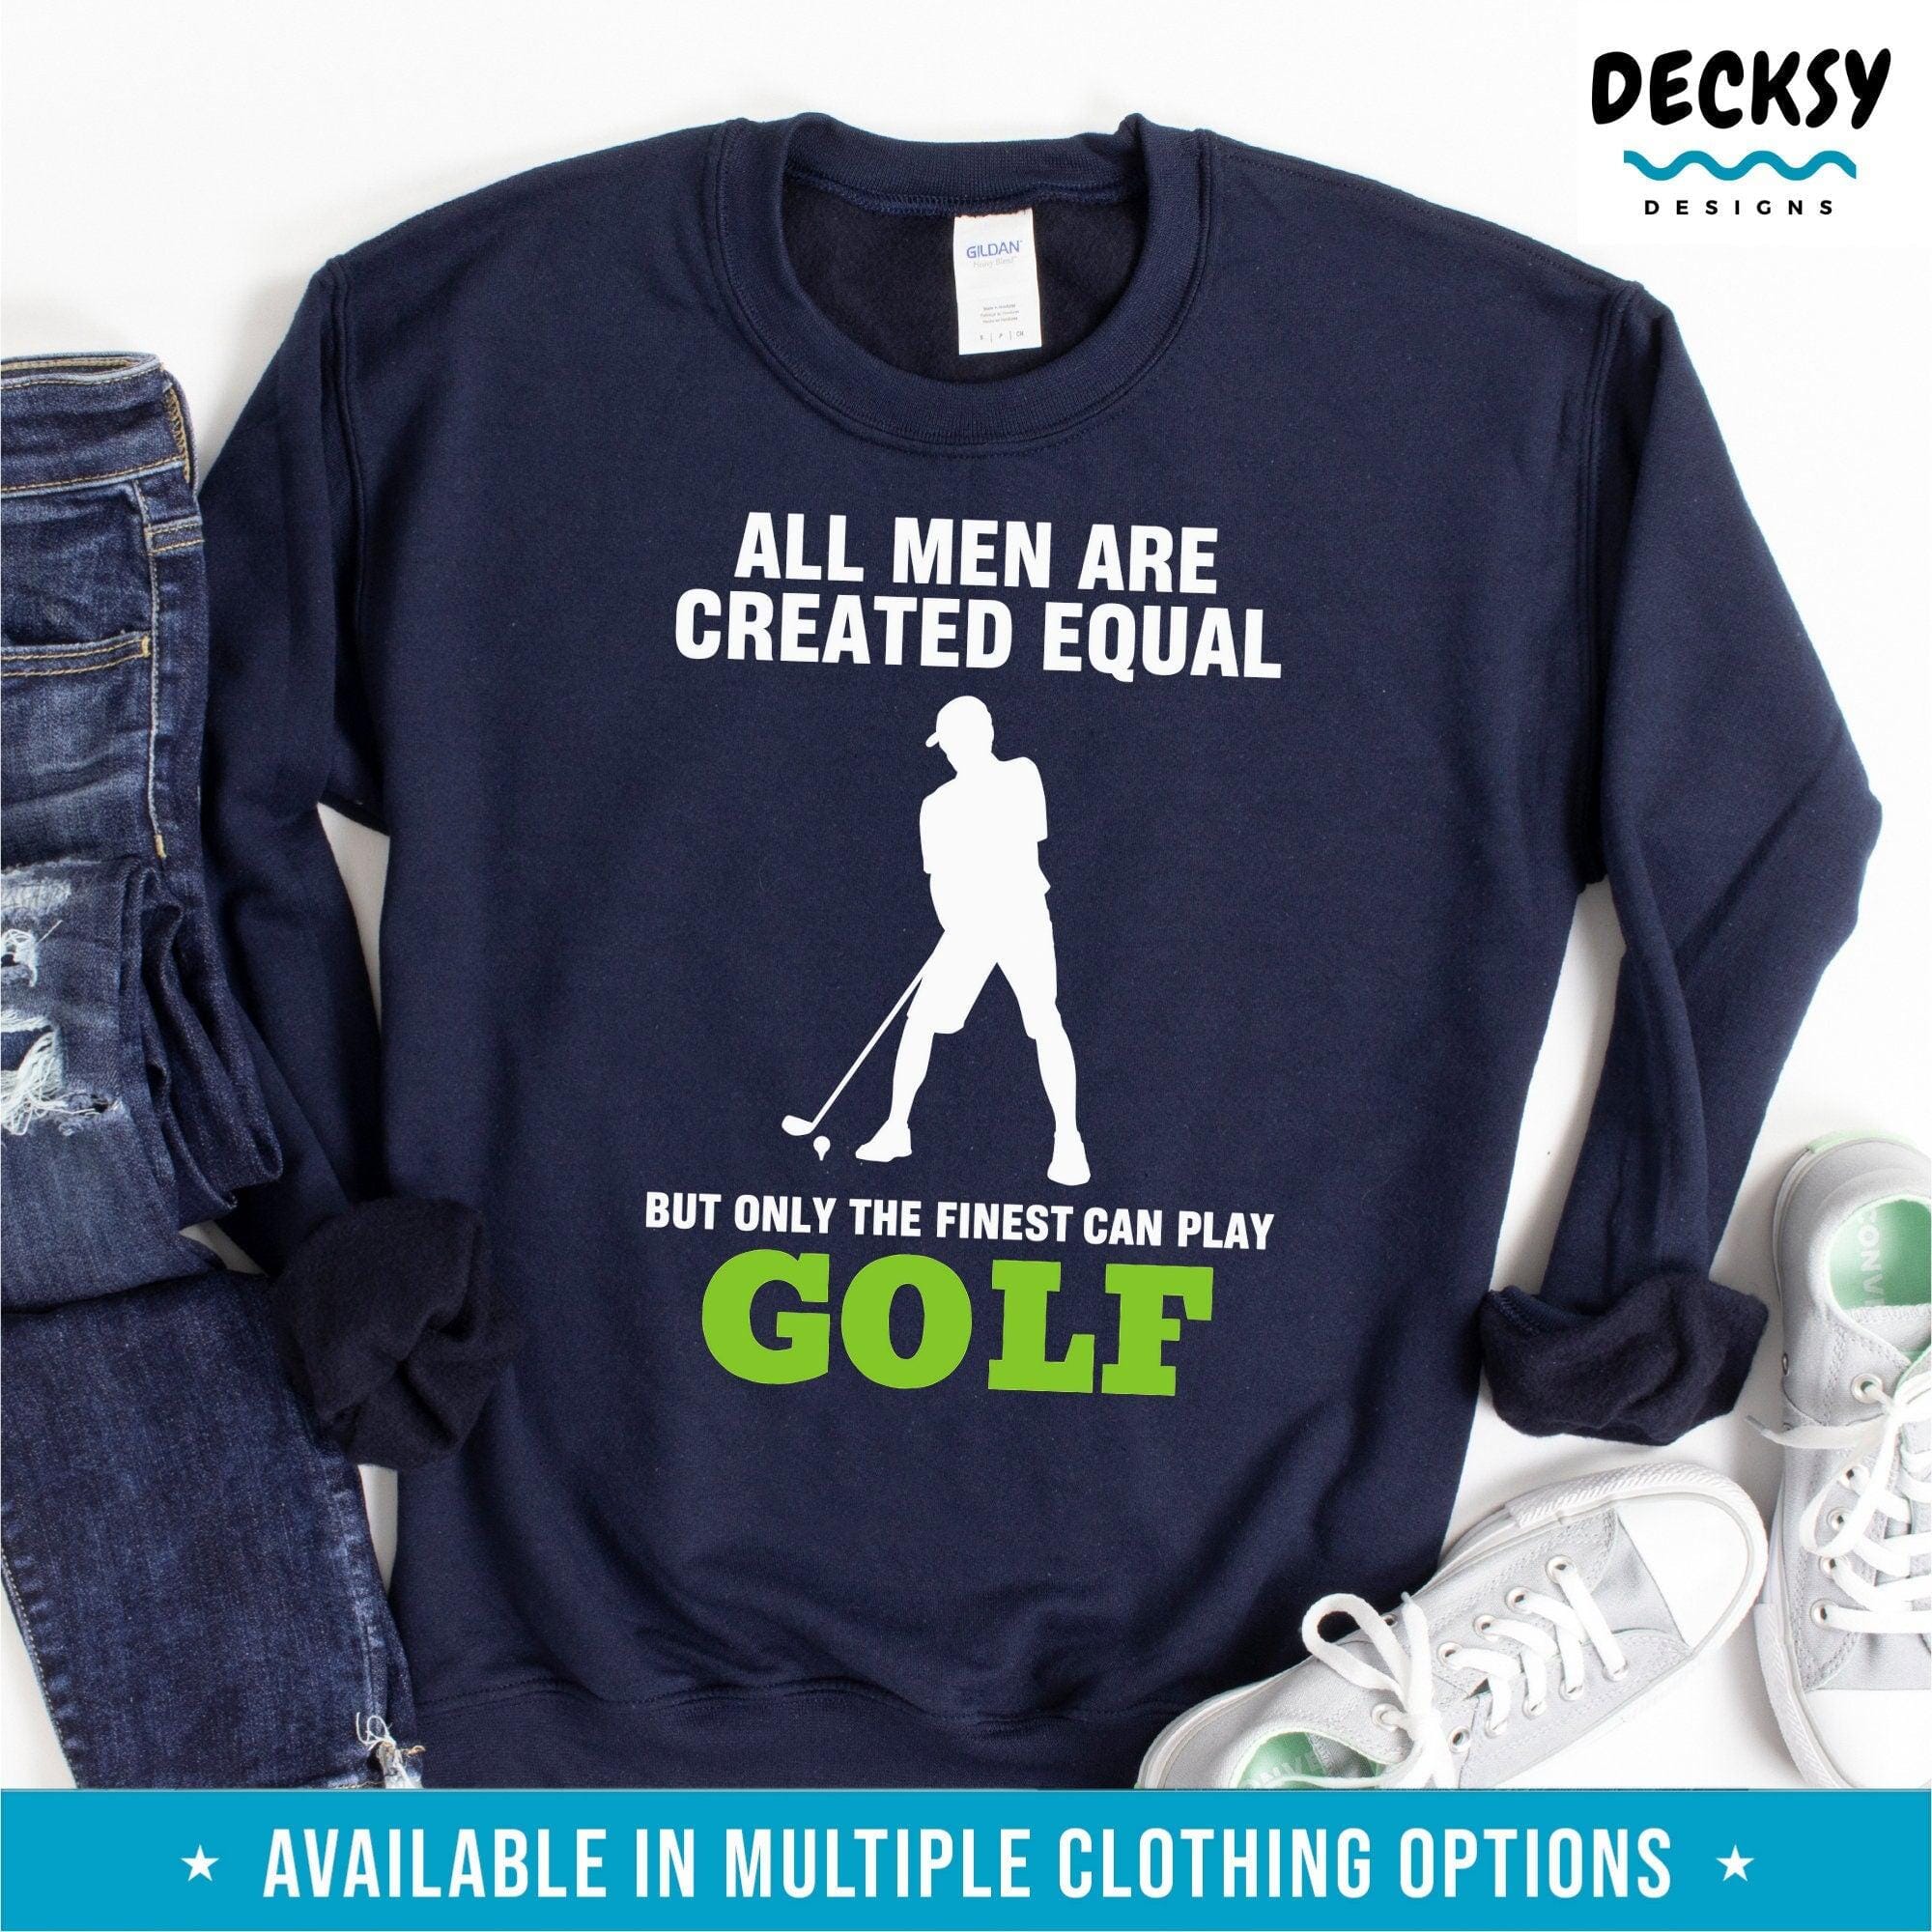 Golf Dad Shirt, Golf Husband Gift-Clothing:Gender-Neutral Adult Clothing:Tops & Tees:T-shirts:Graphic Tees-DecksyDesigns